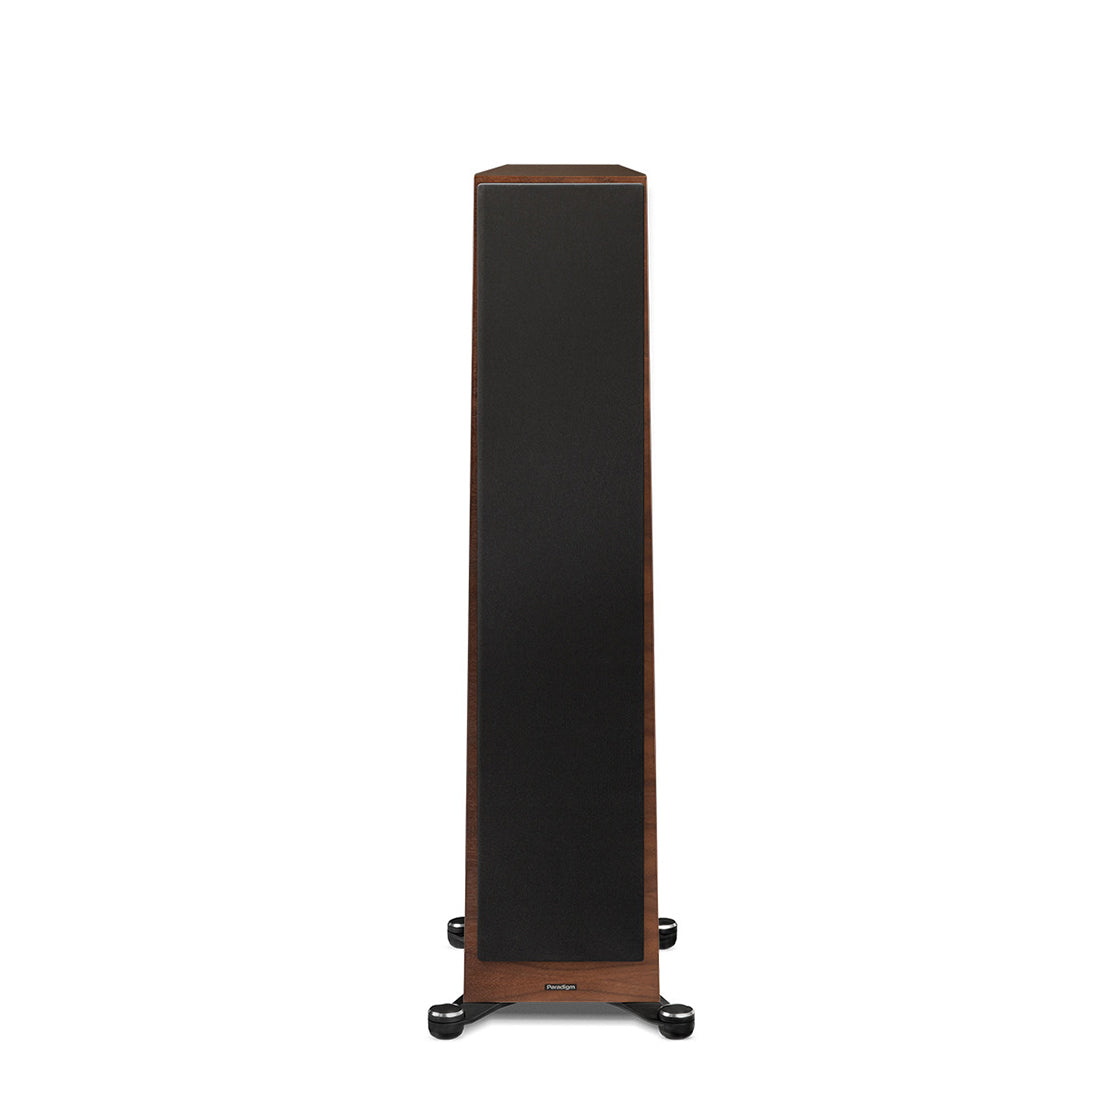 Paradigm Founder 100F Speakers Walnut Front Grille